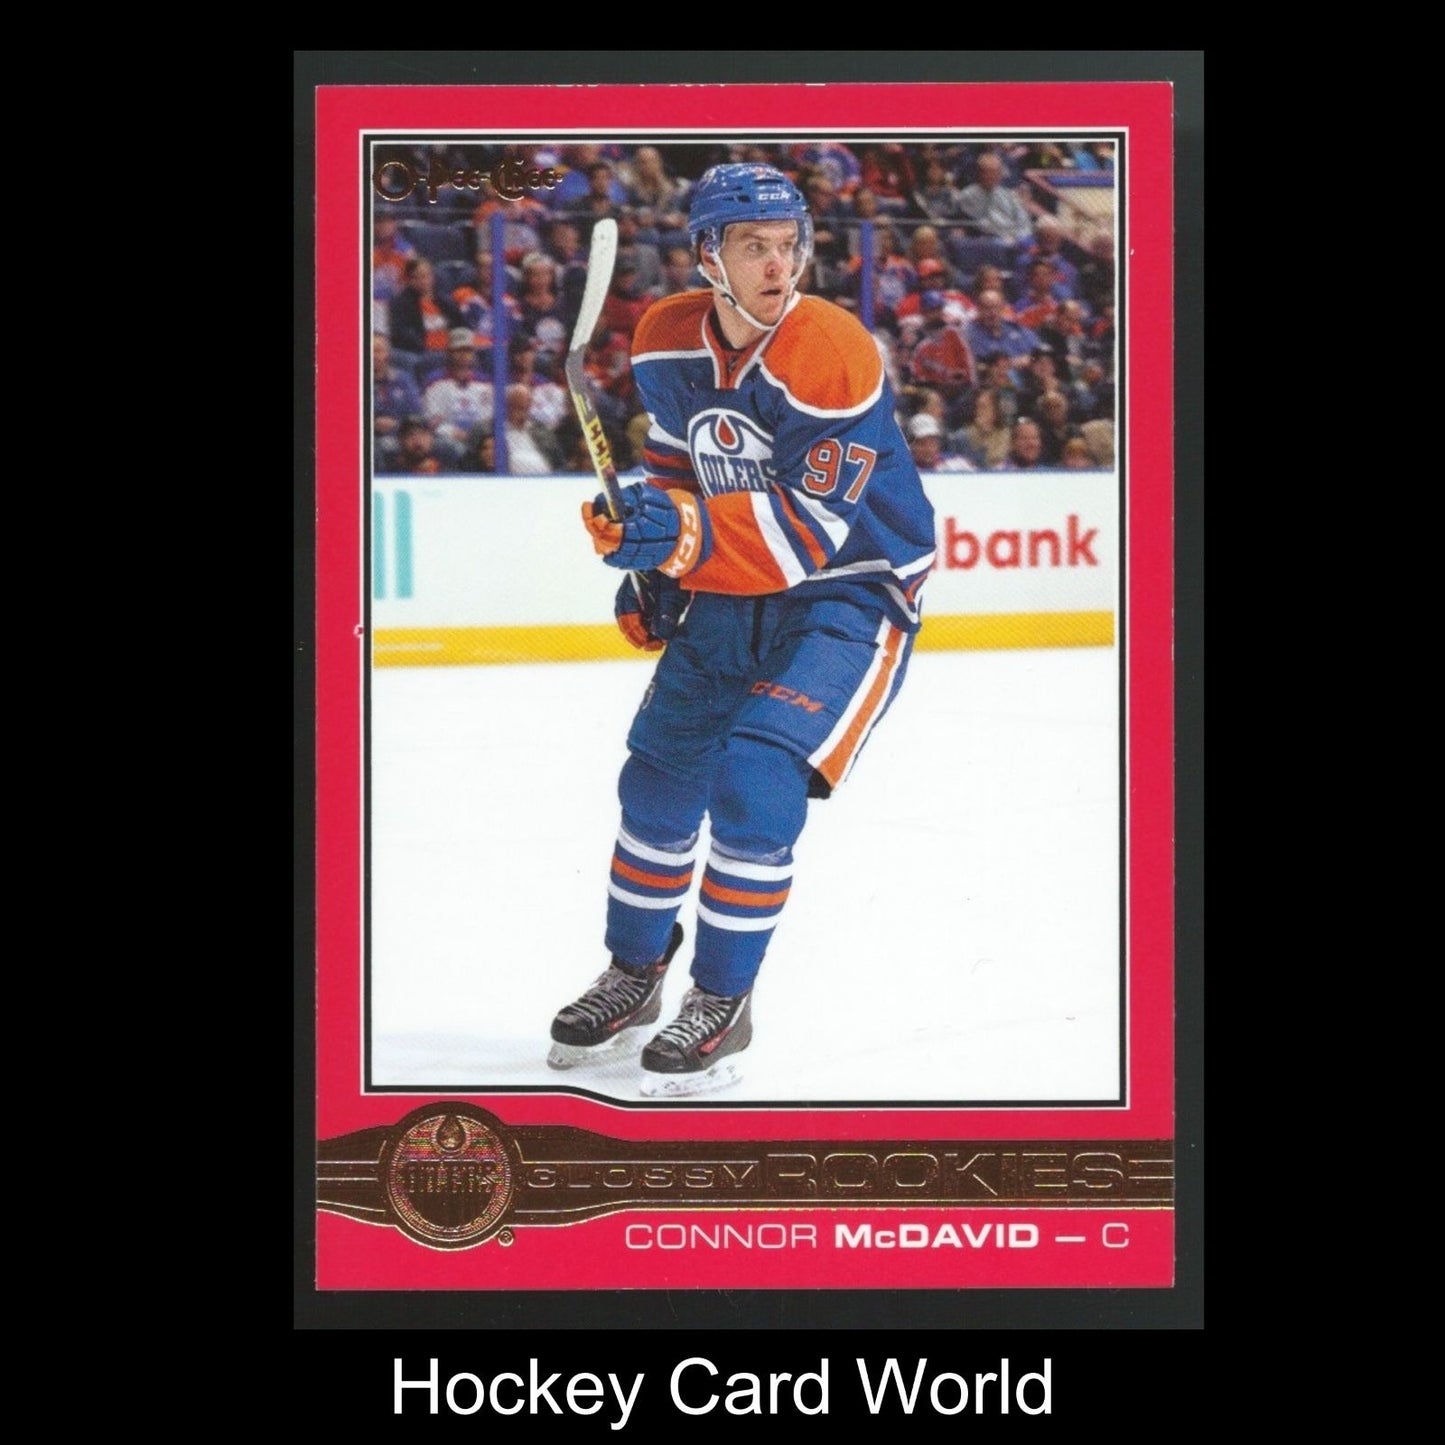 2015-16 O-Pee-Chee Glossy Red CONNOR McDAVID Rookie RC Upper Deck